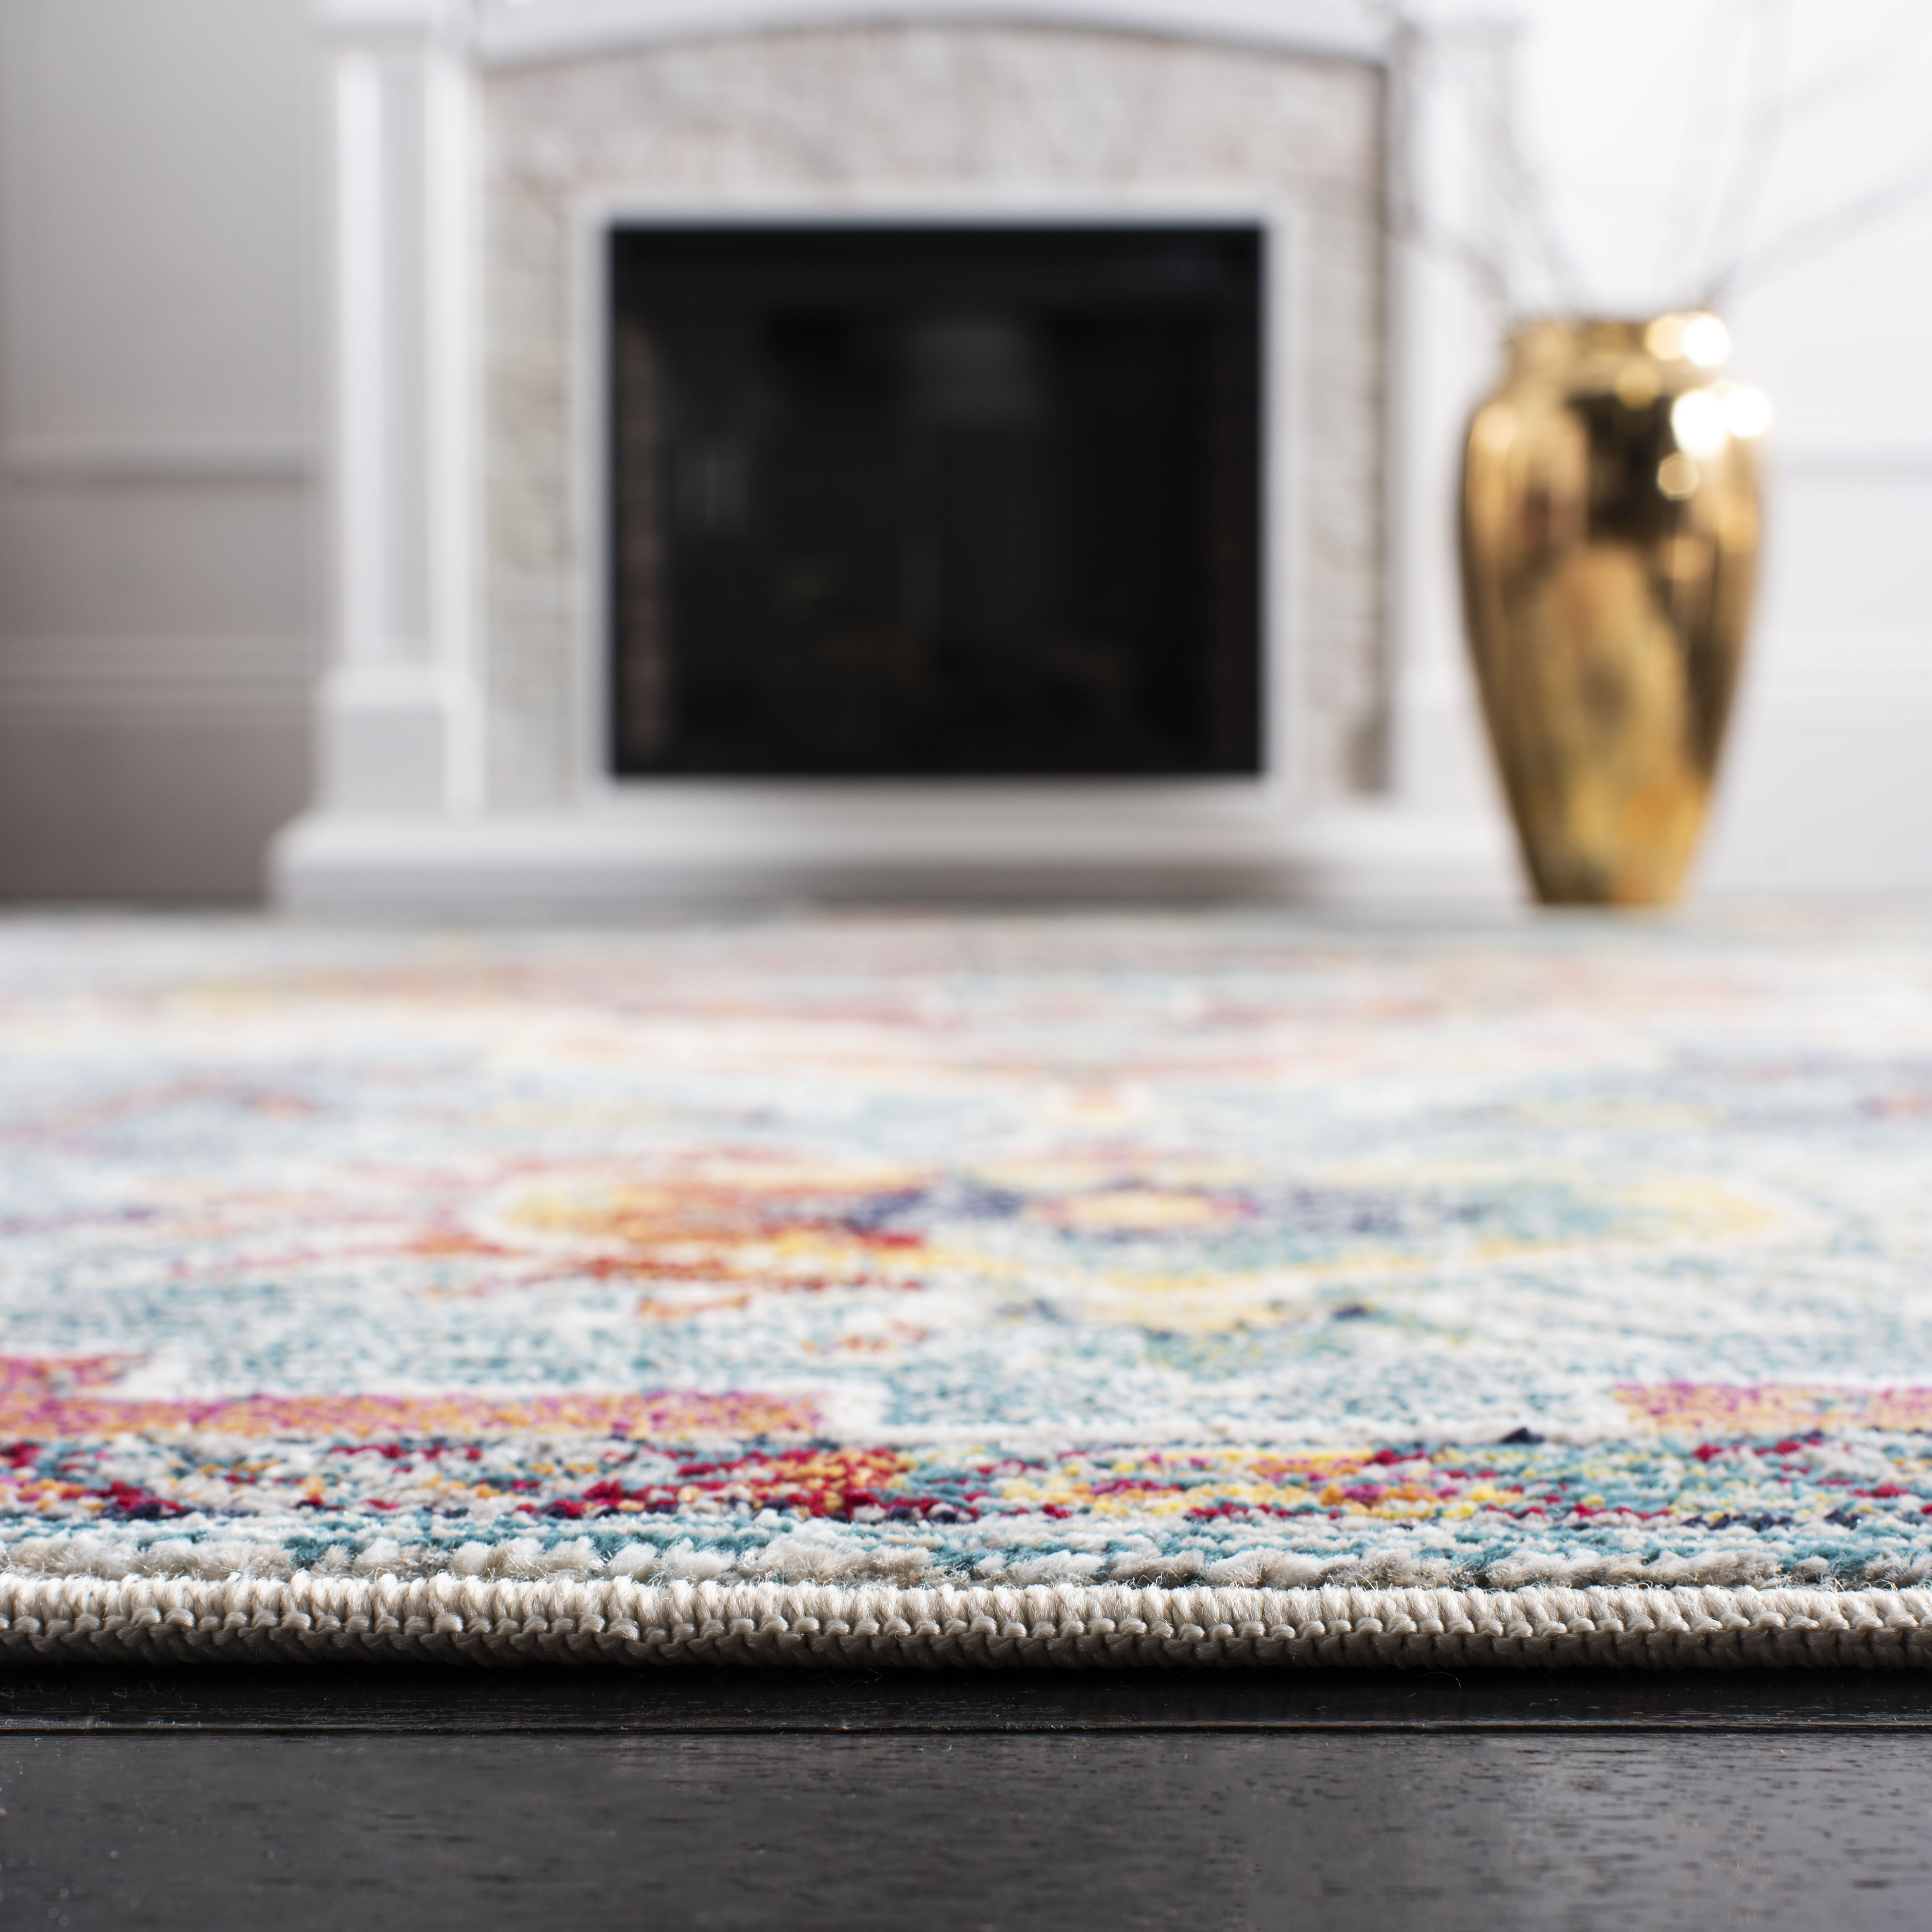 Safavieh Crystal 5' x 8' Rug in Teal and Red - image 4 of 9